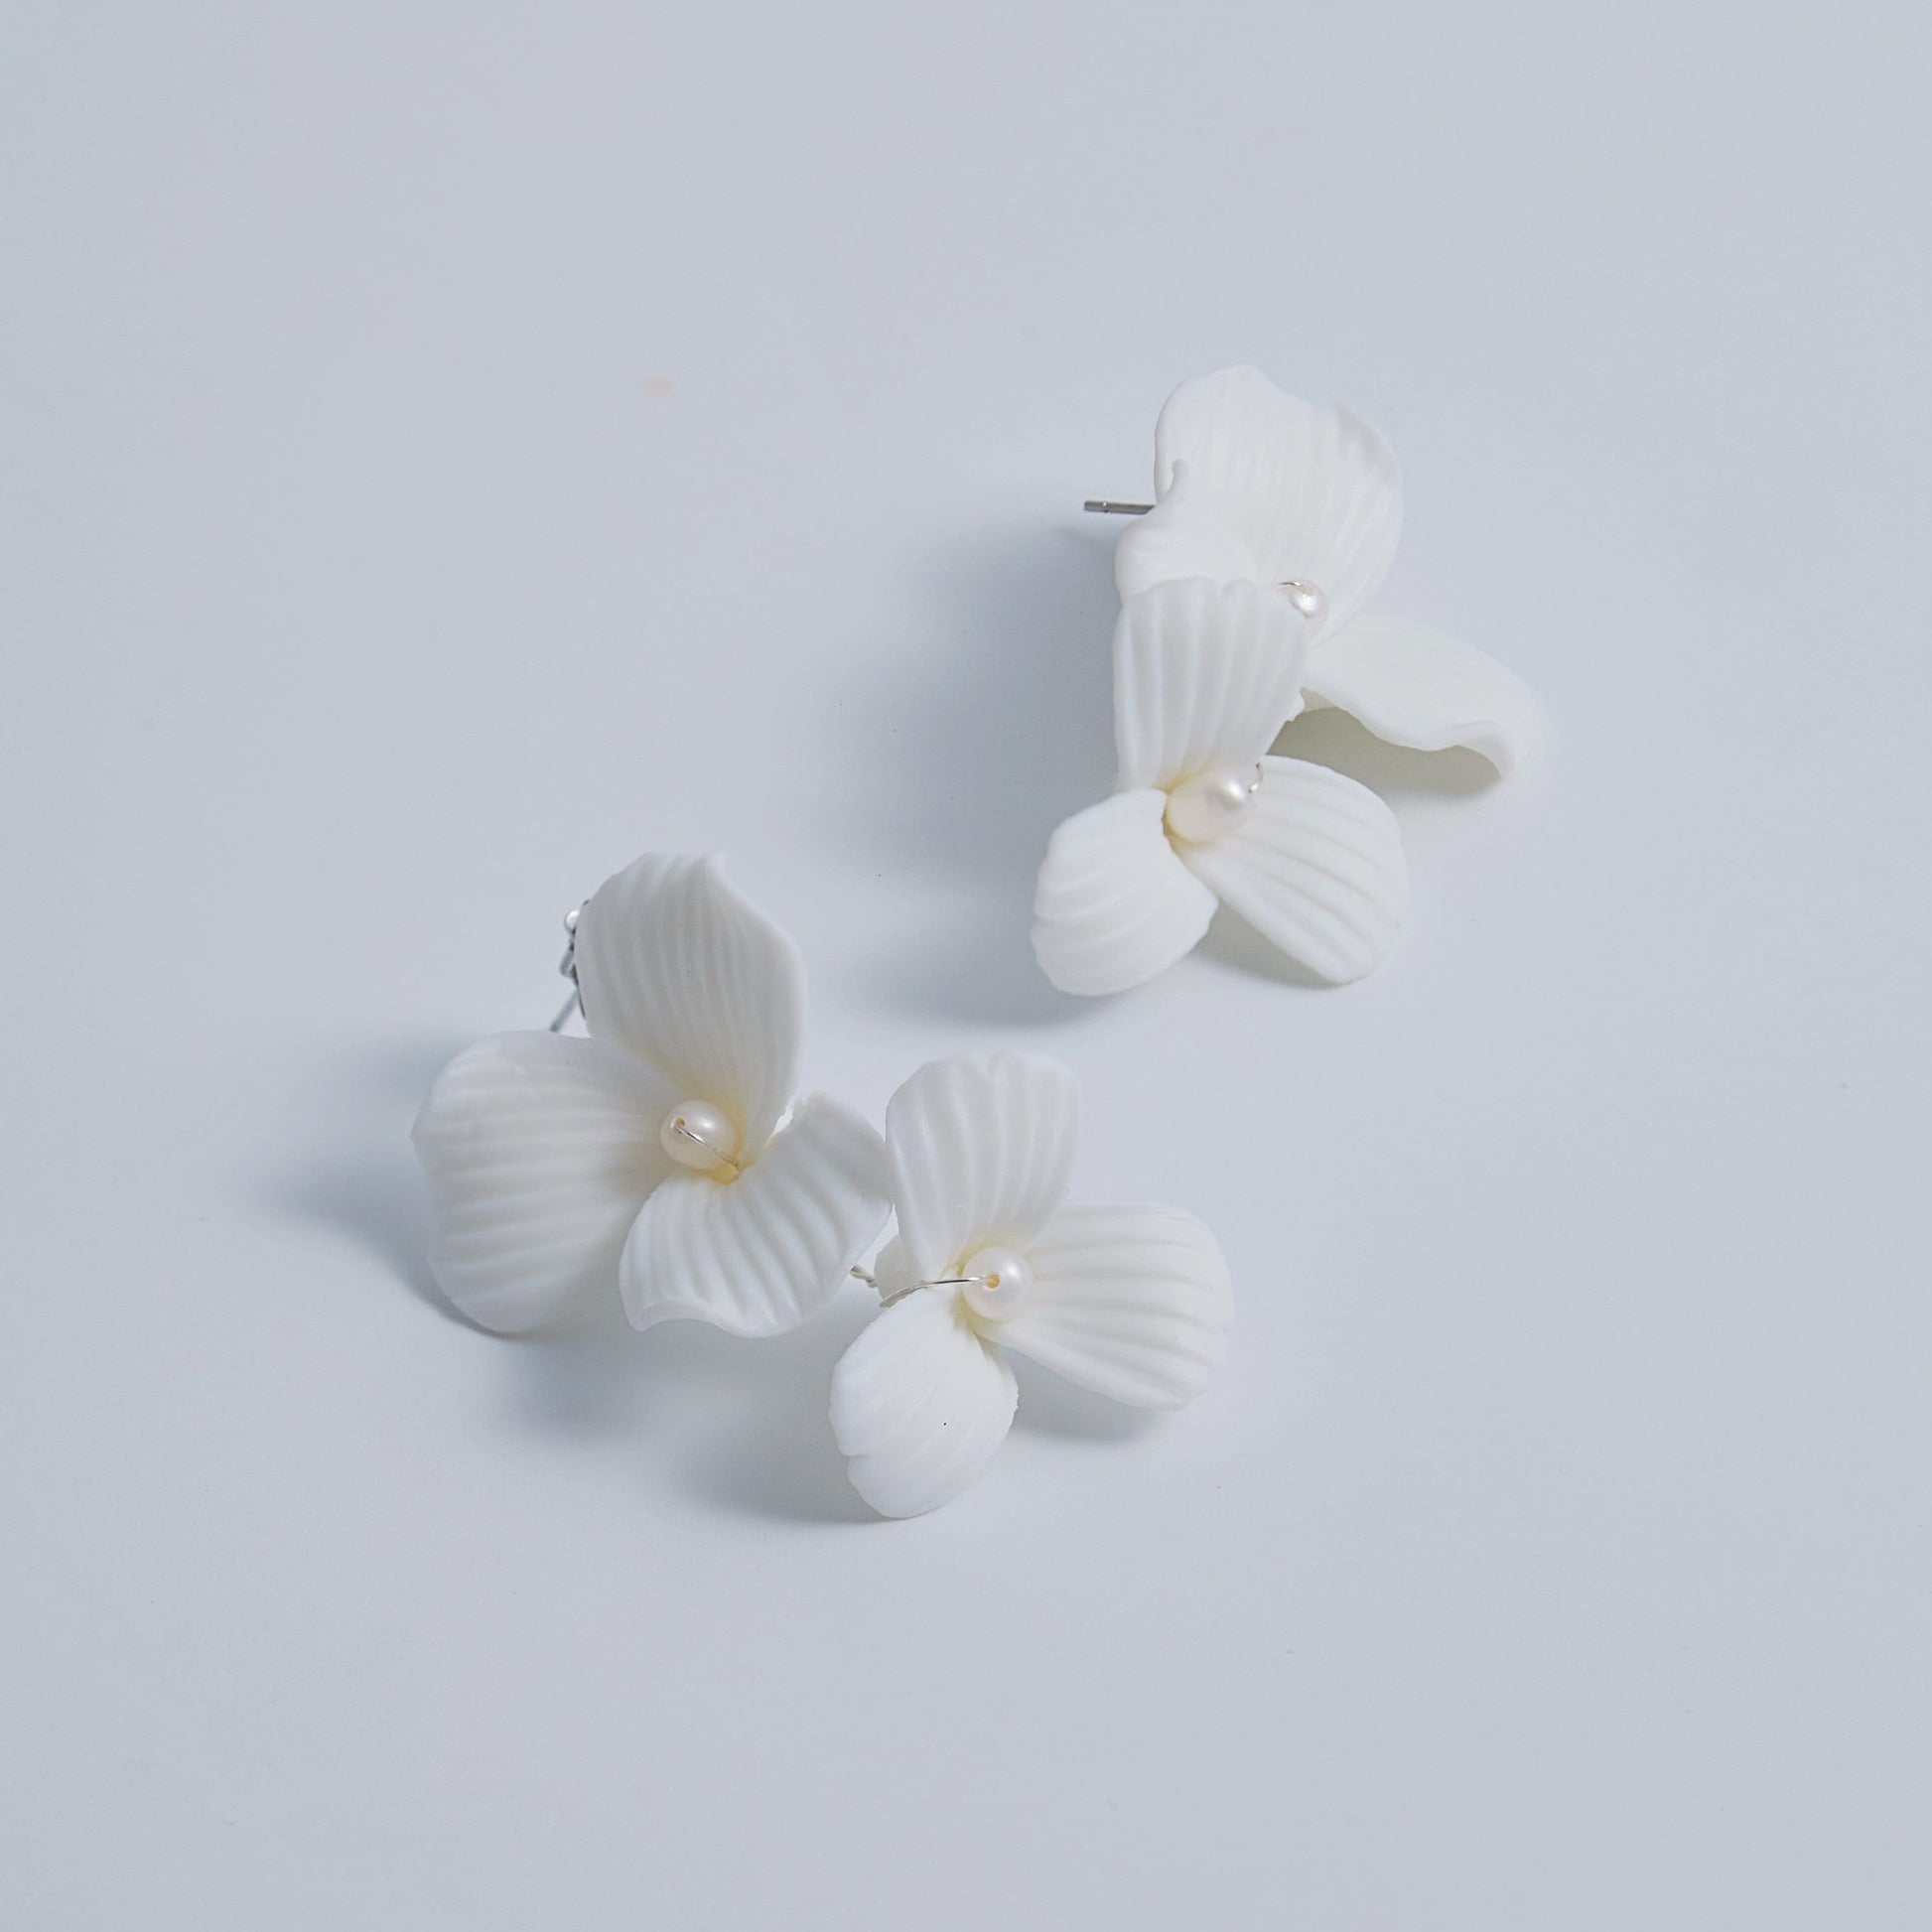 Skillfully handcrafted, these flower bridal earrings are the perfect complement to our signature porcelain headpieces. Each earring is exquisitely made by hand, featuring two delicate white clay flowers adorned with freshwater pearls.